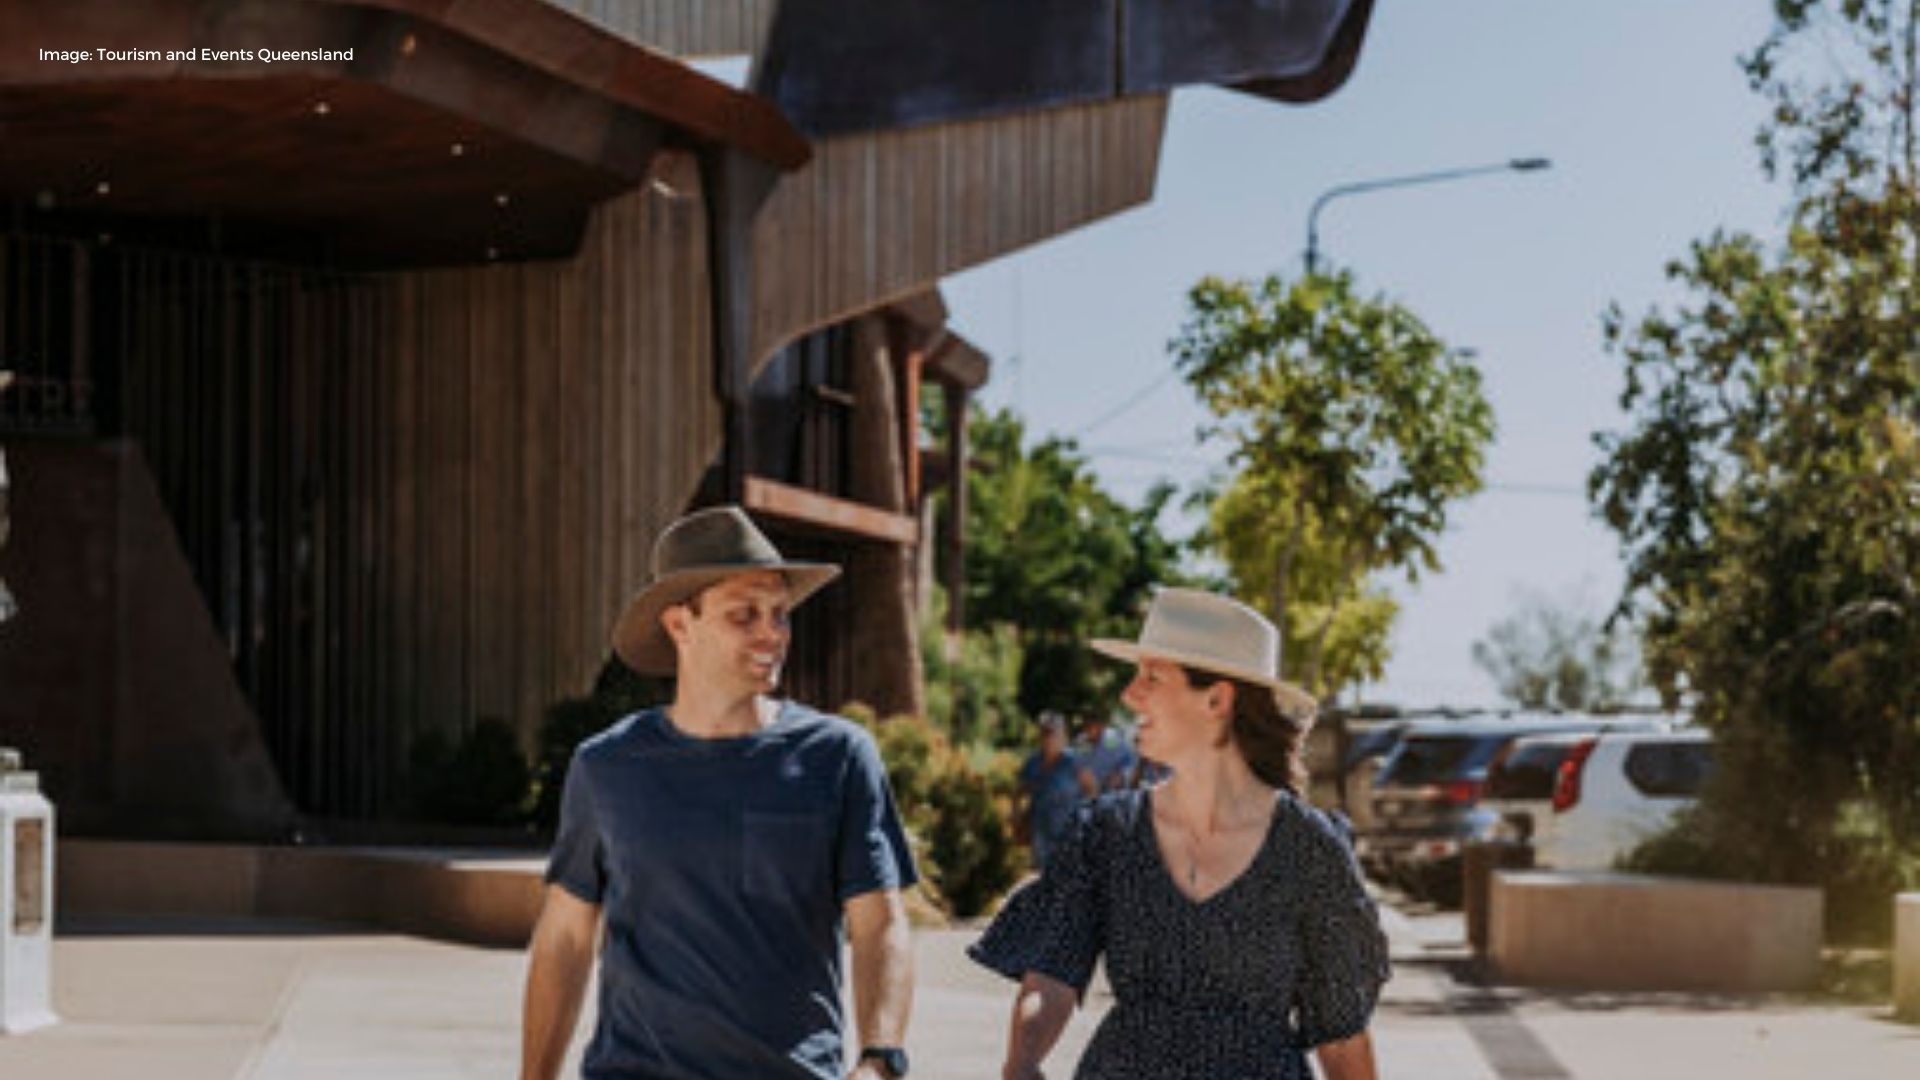 Couple walking away from Waltzing Matilda Centre | Tourism & Events Queensland